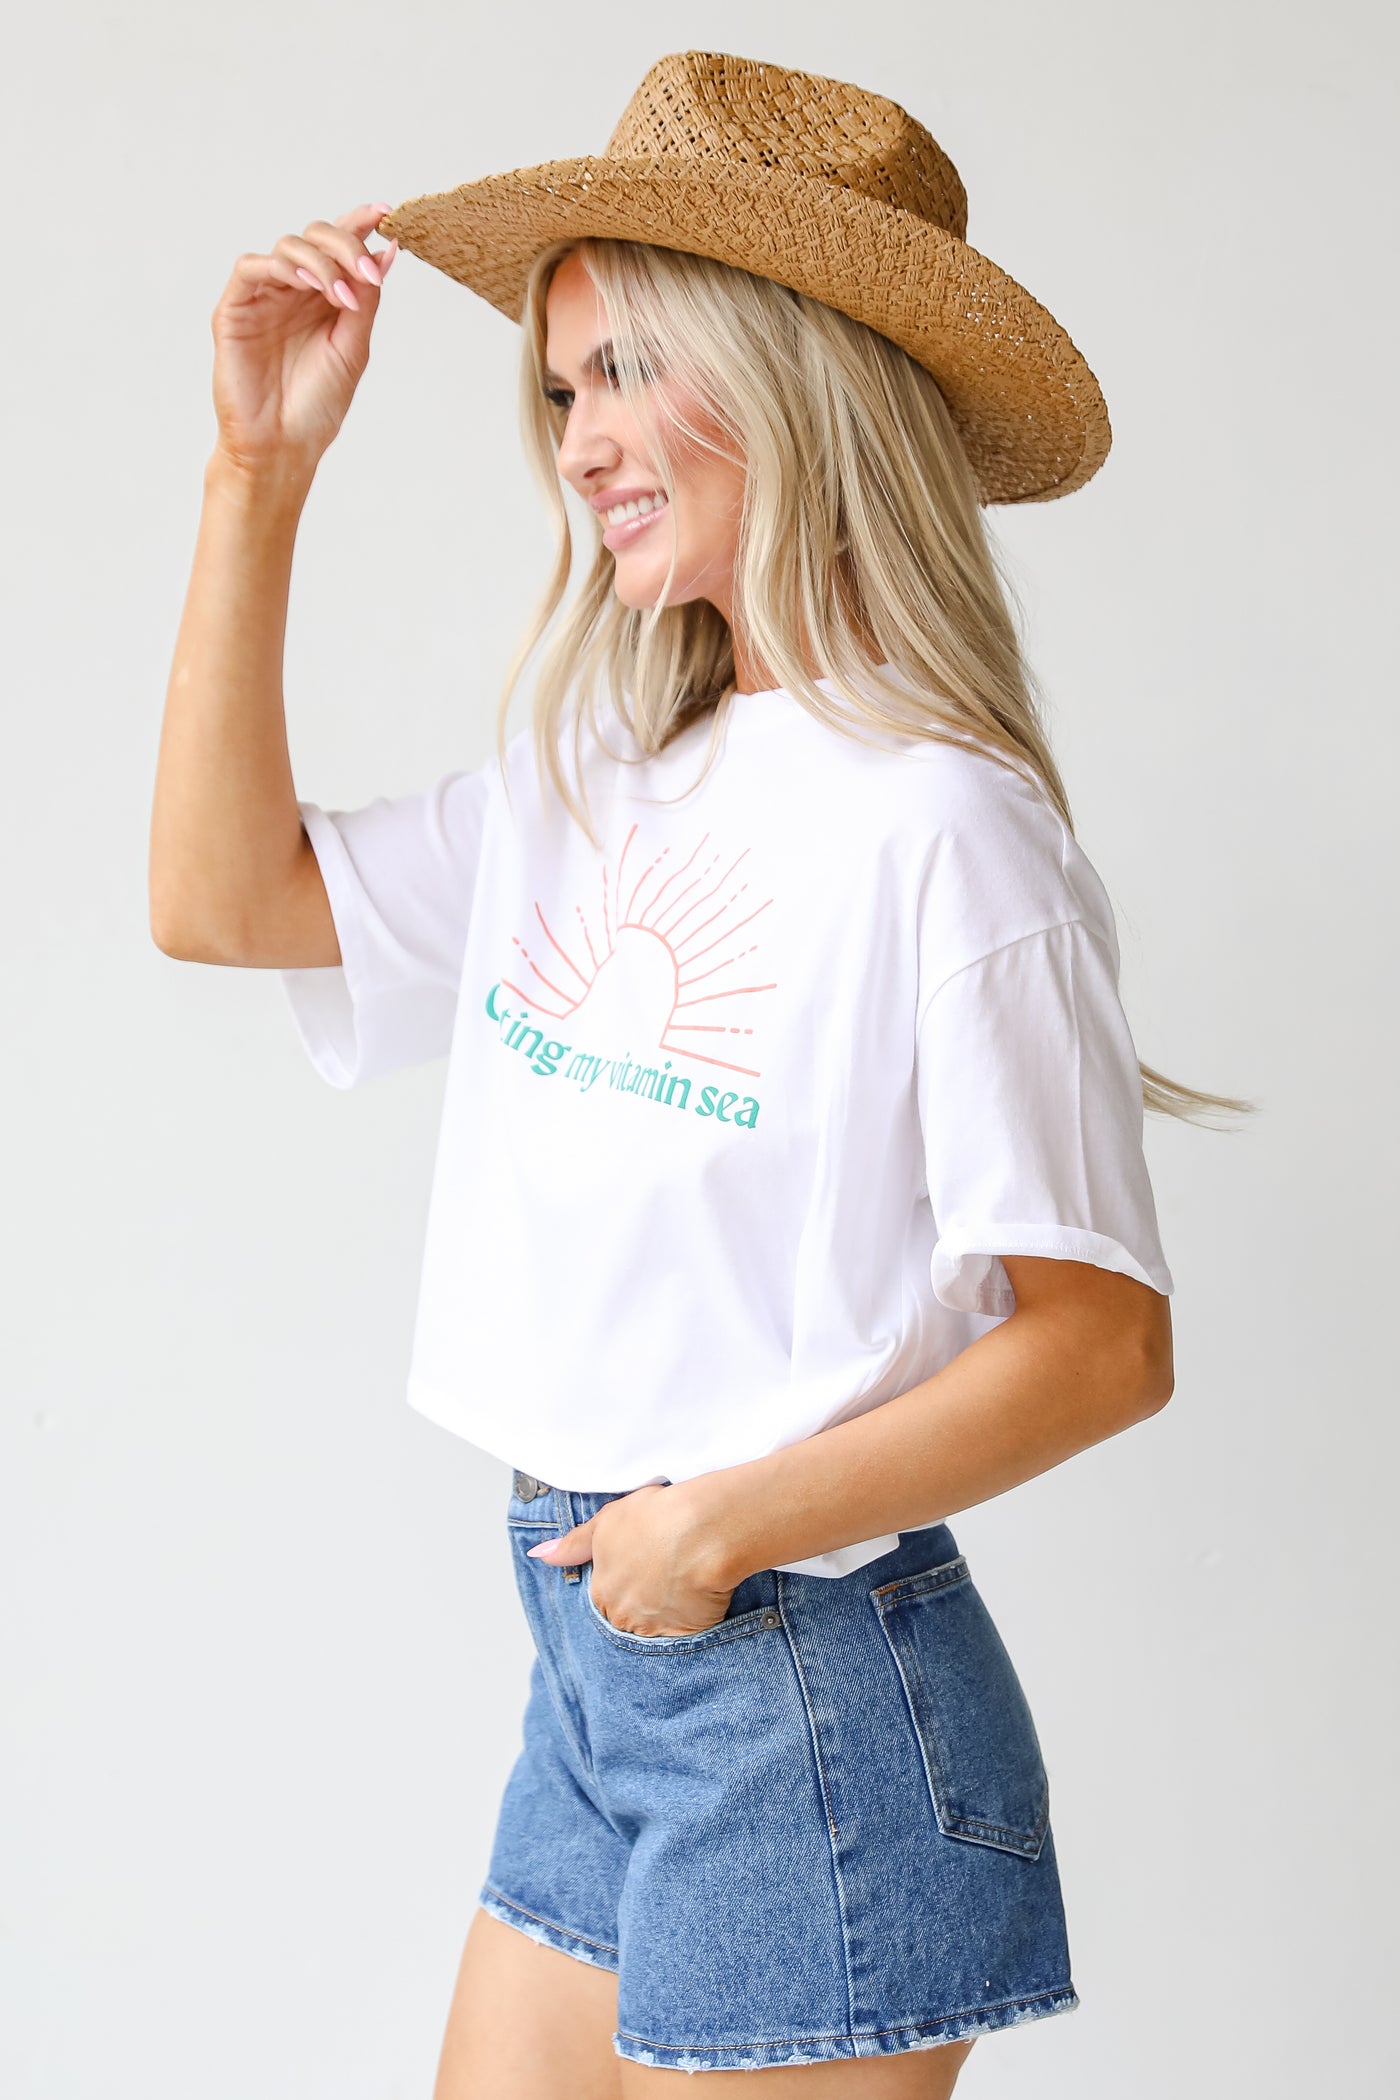 Getting My Vitamin Sea Cropped Graphic Tee side view